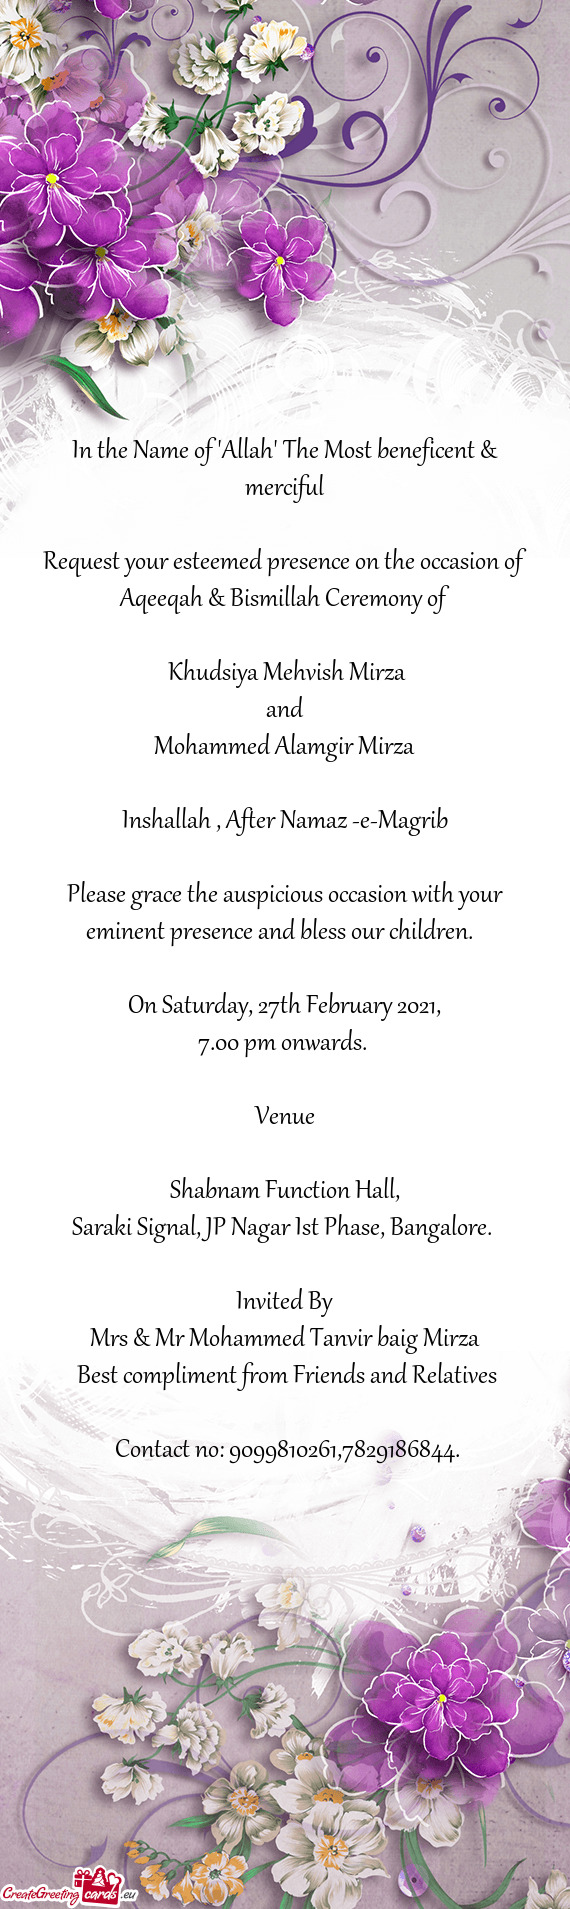 Request your esteemed presence on the occasion of Aqeeqah & Bismillah Ceremony of